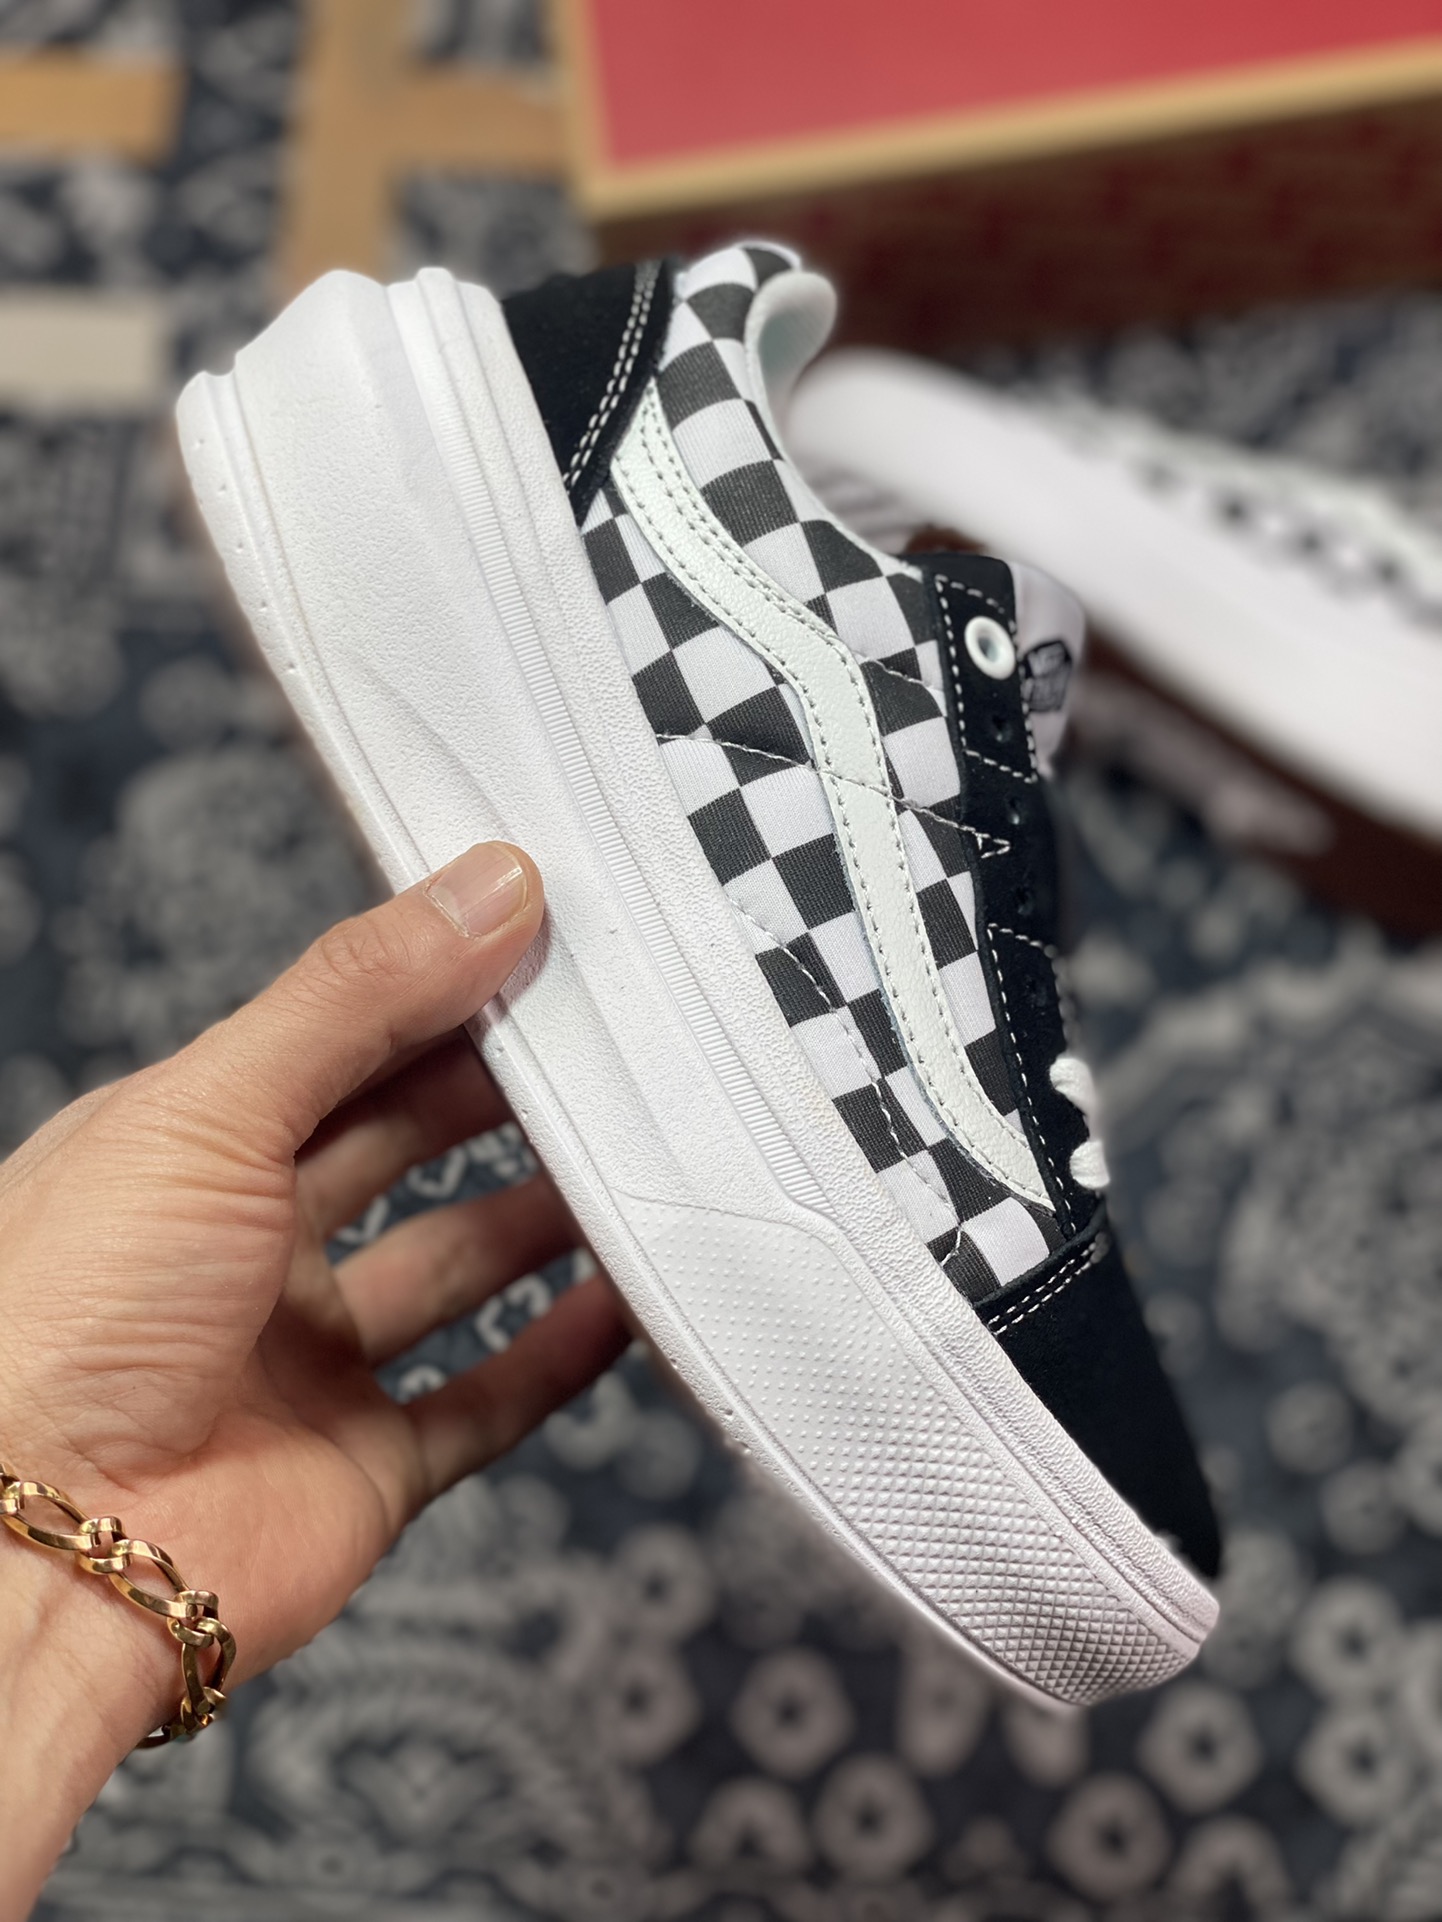 Vans Old Skool Overt CC ultra-light thick-soled plaid height-increasing shoes Vans has the best of both worlds